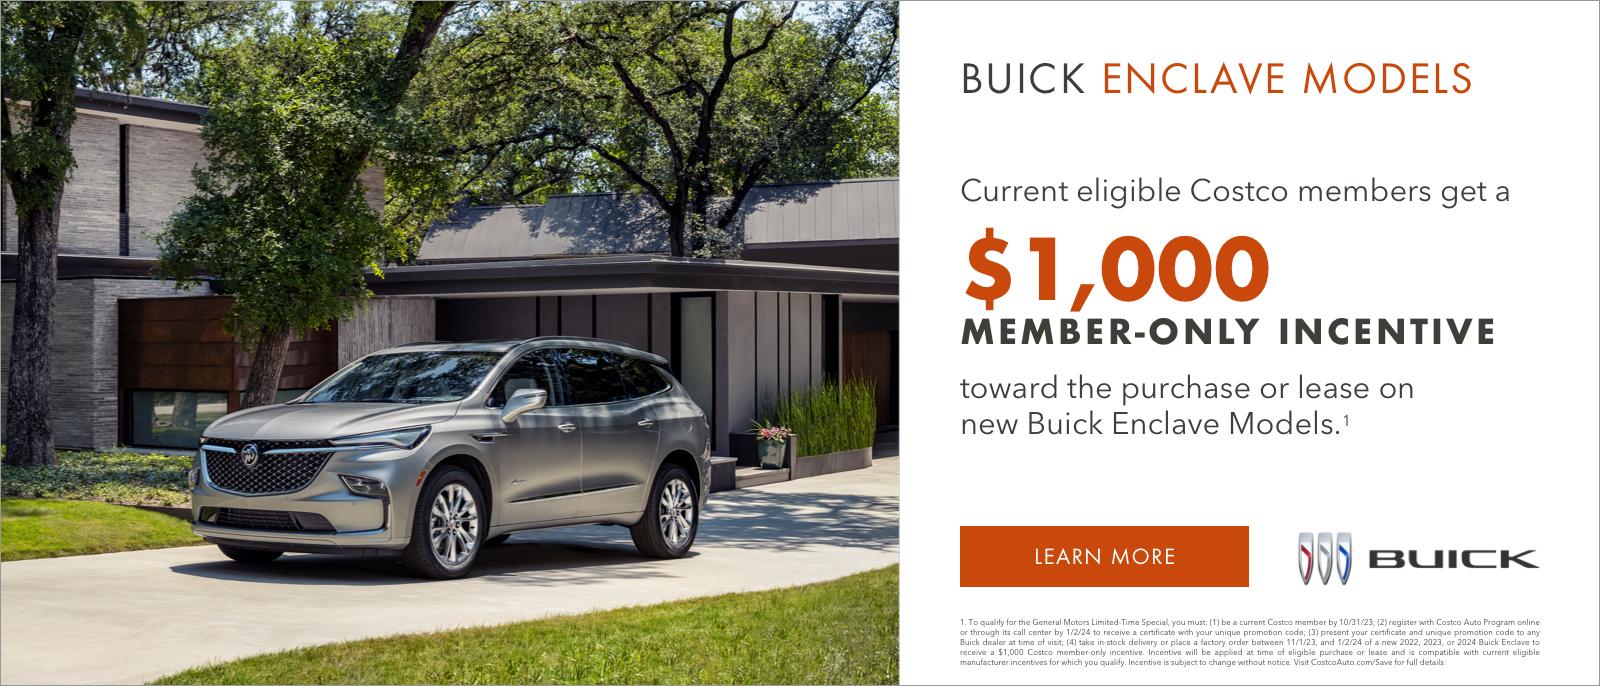 CURRENT ELIGIBLE COSTCO MEMBERS GET A
$1,000 MEMBER-ONLY INCENTIVE
TOWARD THE PURCHASE OR LEASE
ON NEW BUICK ENCLAVE MODELS1